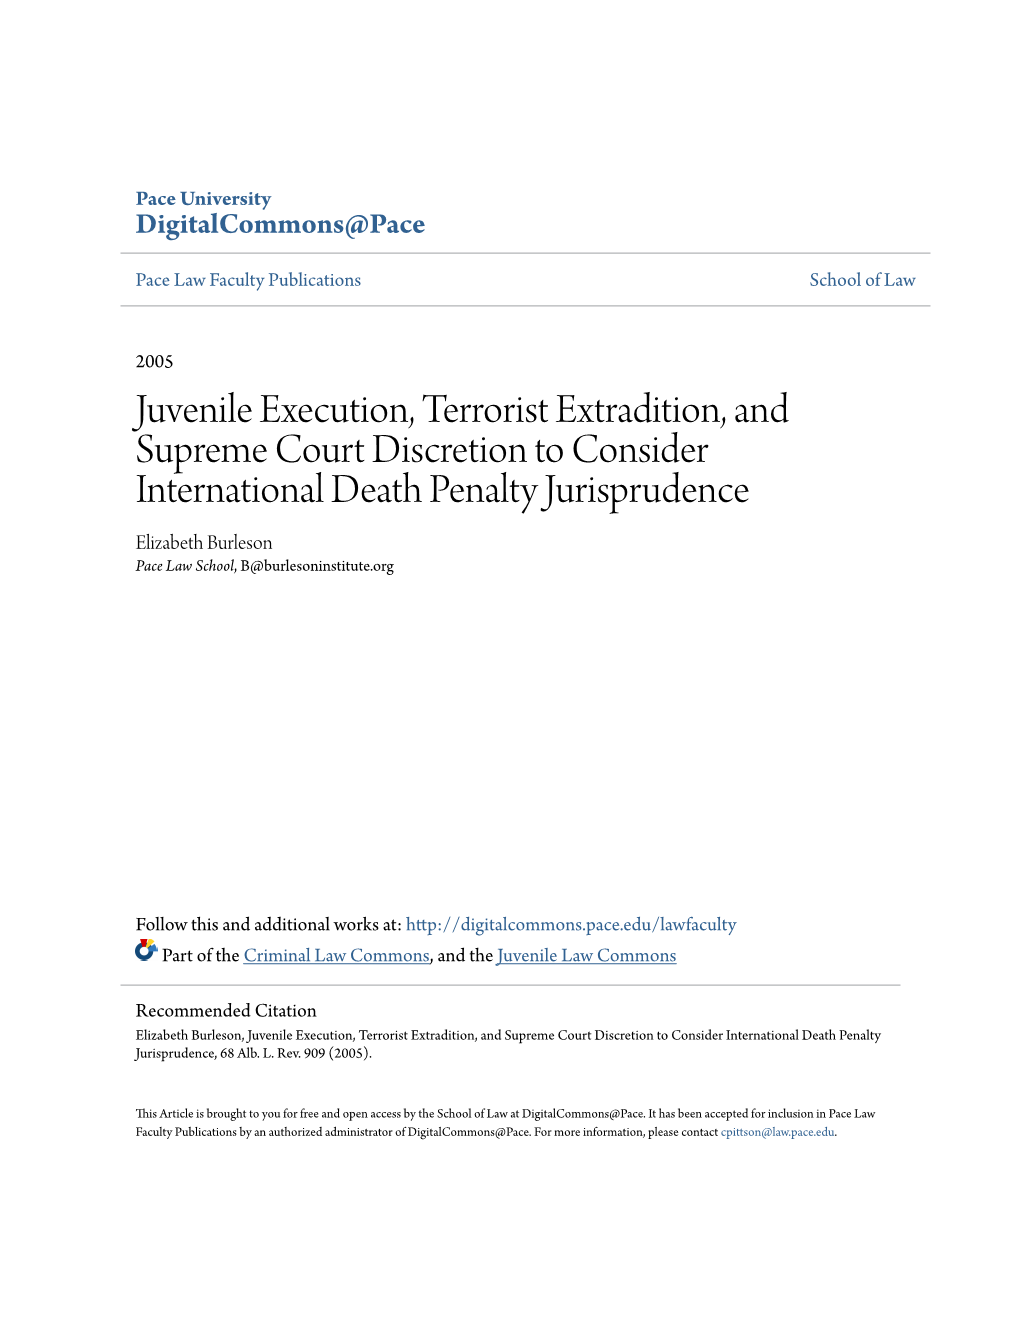 Juvenile Execution, Terrorist Extradition, and Supreme